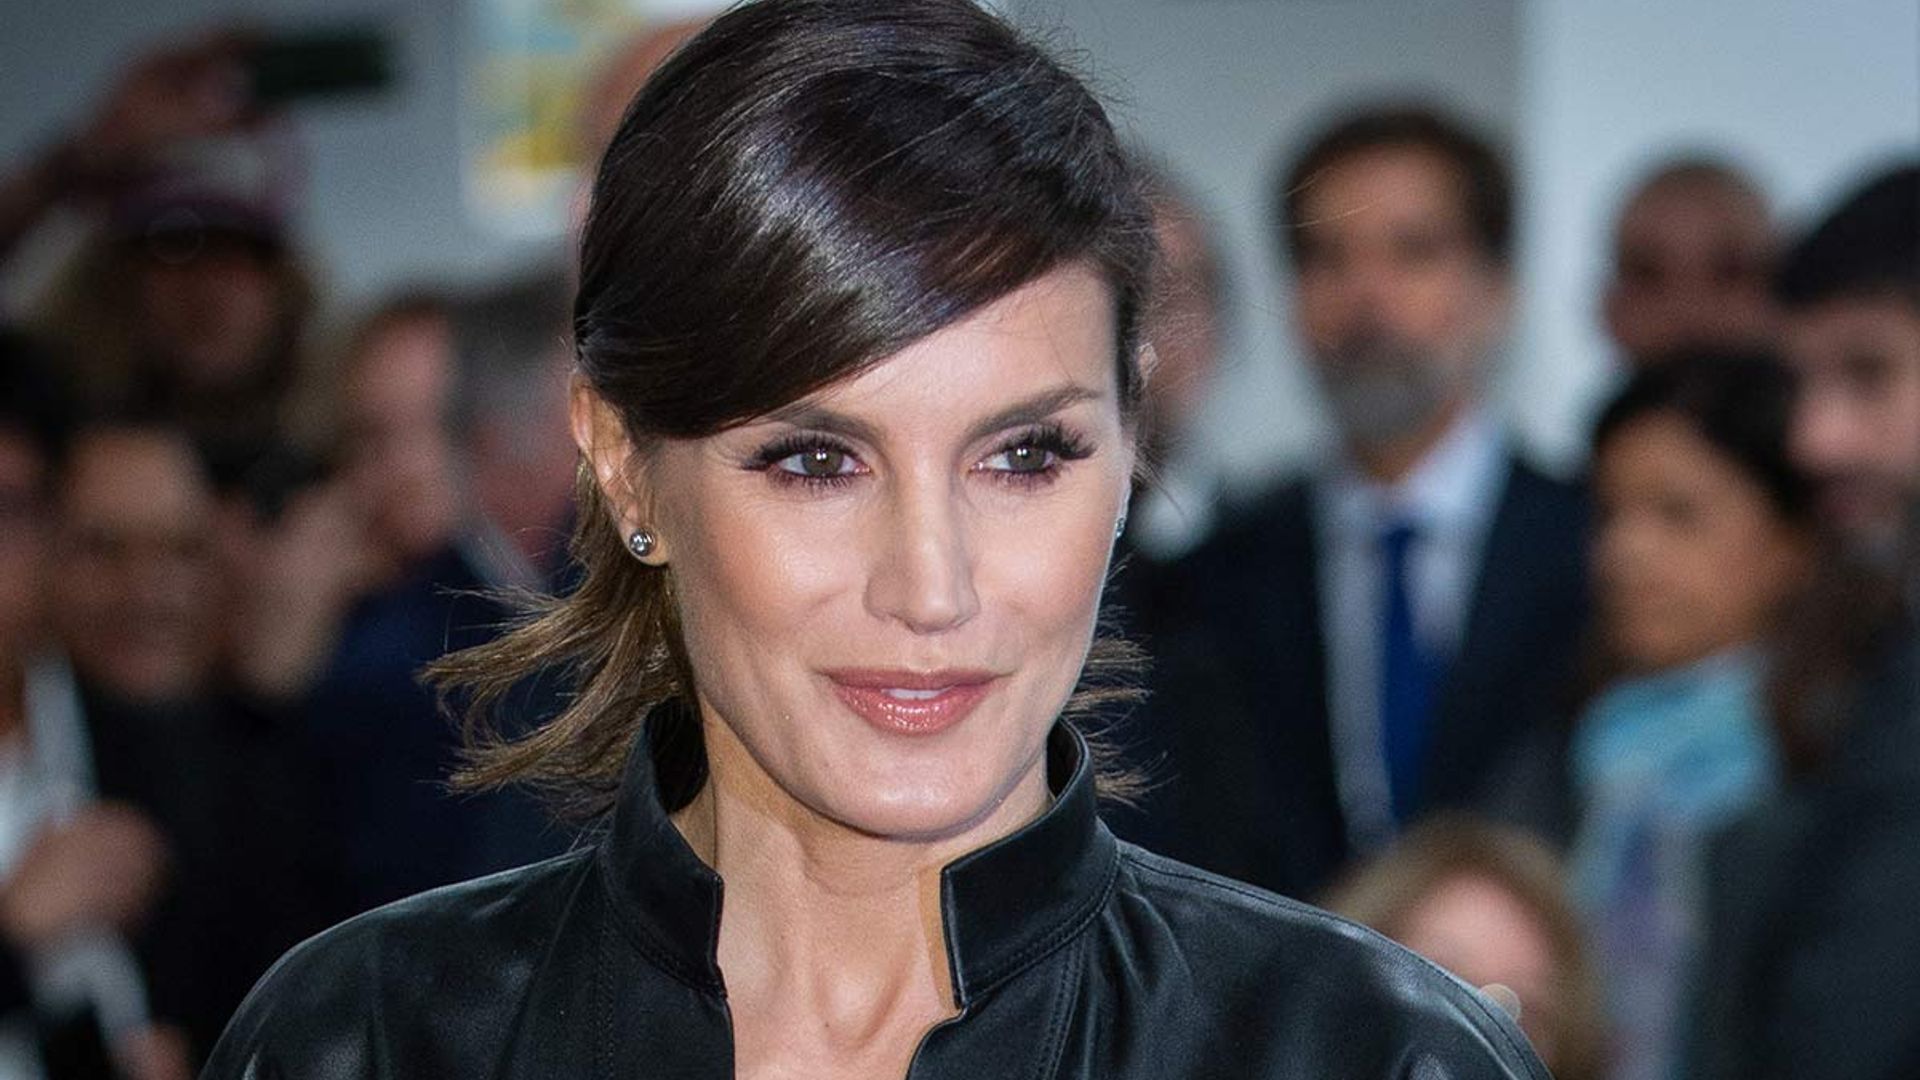 Queen Letizia turns heads in edgy leather dress